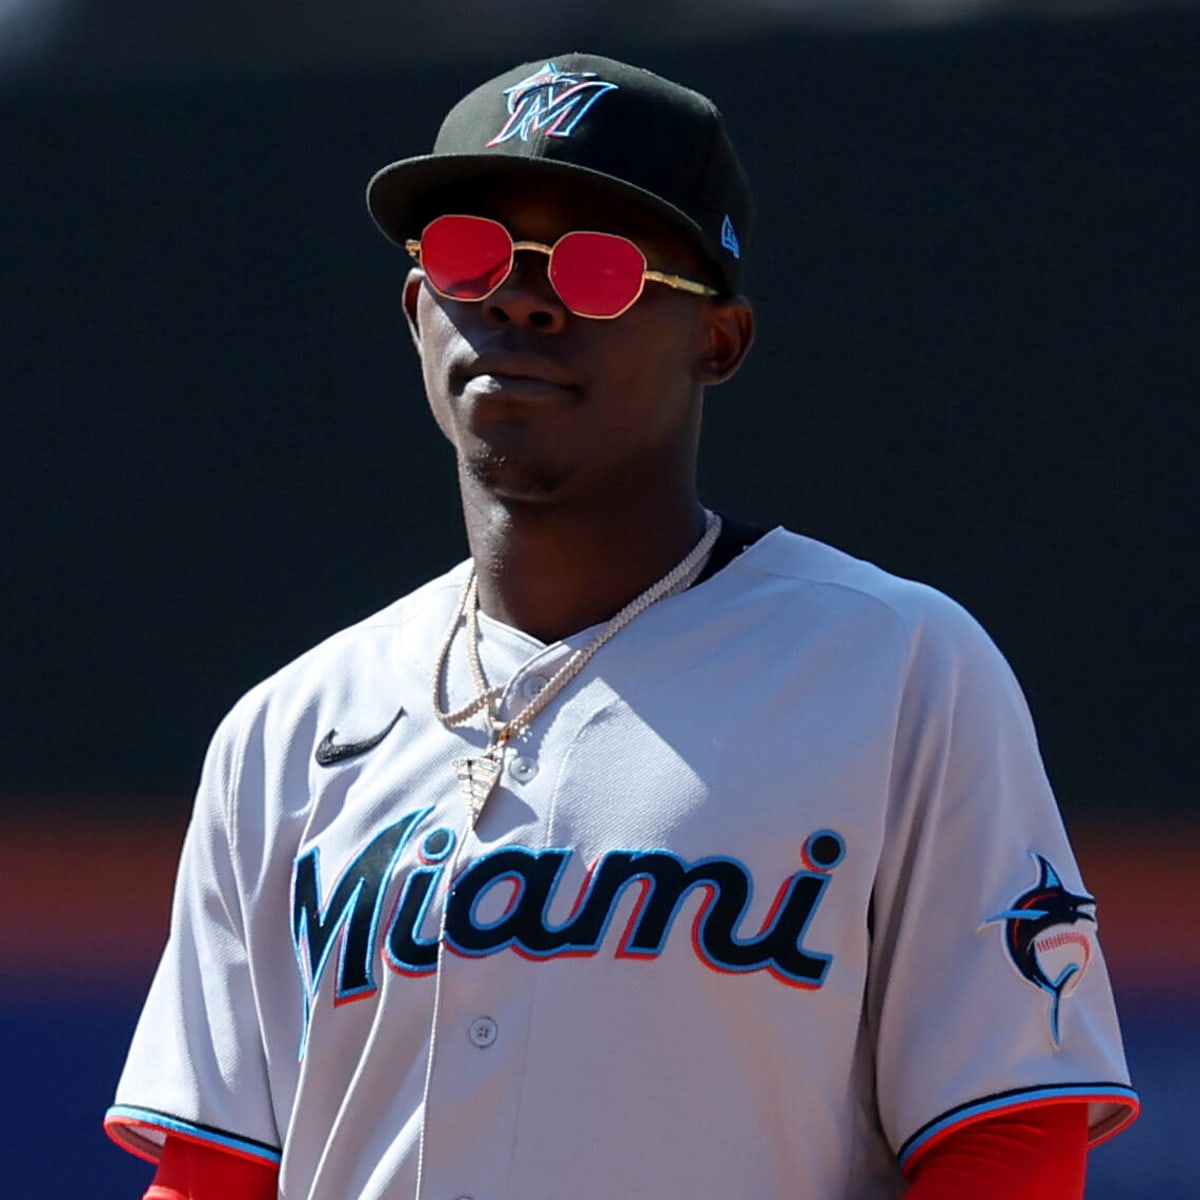 Jazz Chisholm Jr. injury update: Jazz Chisholm Jr. Injury Update: Health  status and recovery time for Miami Marlins star sent out on rehab assignment